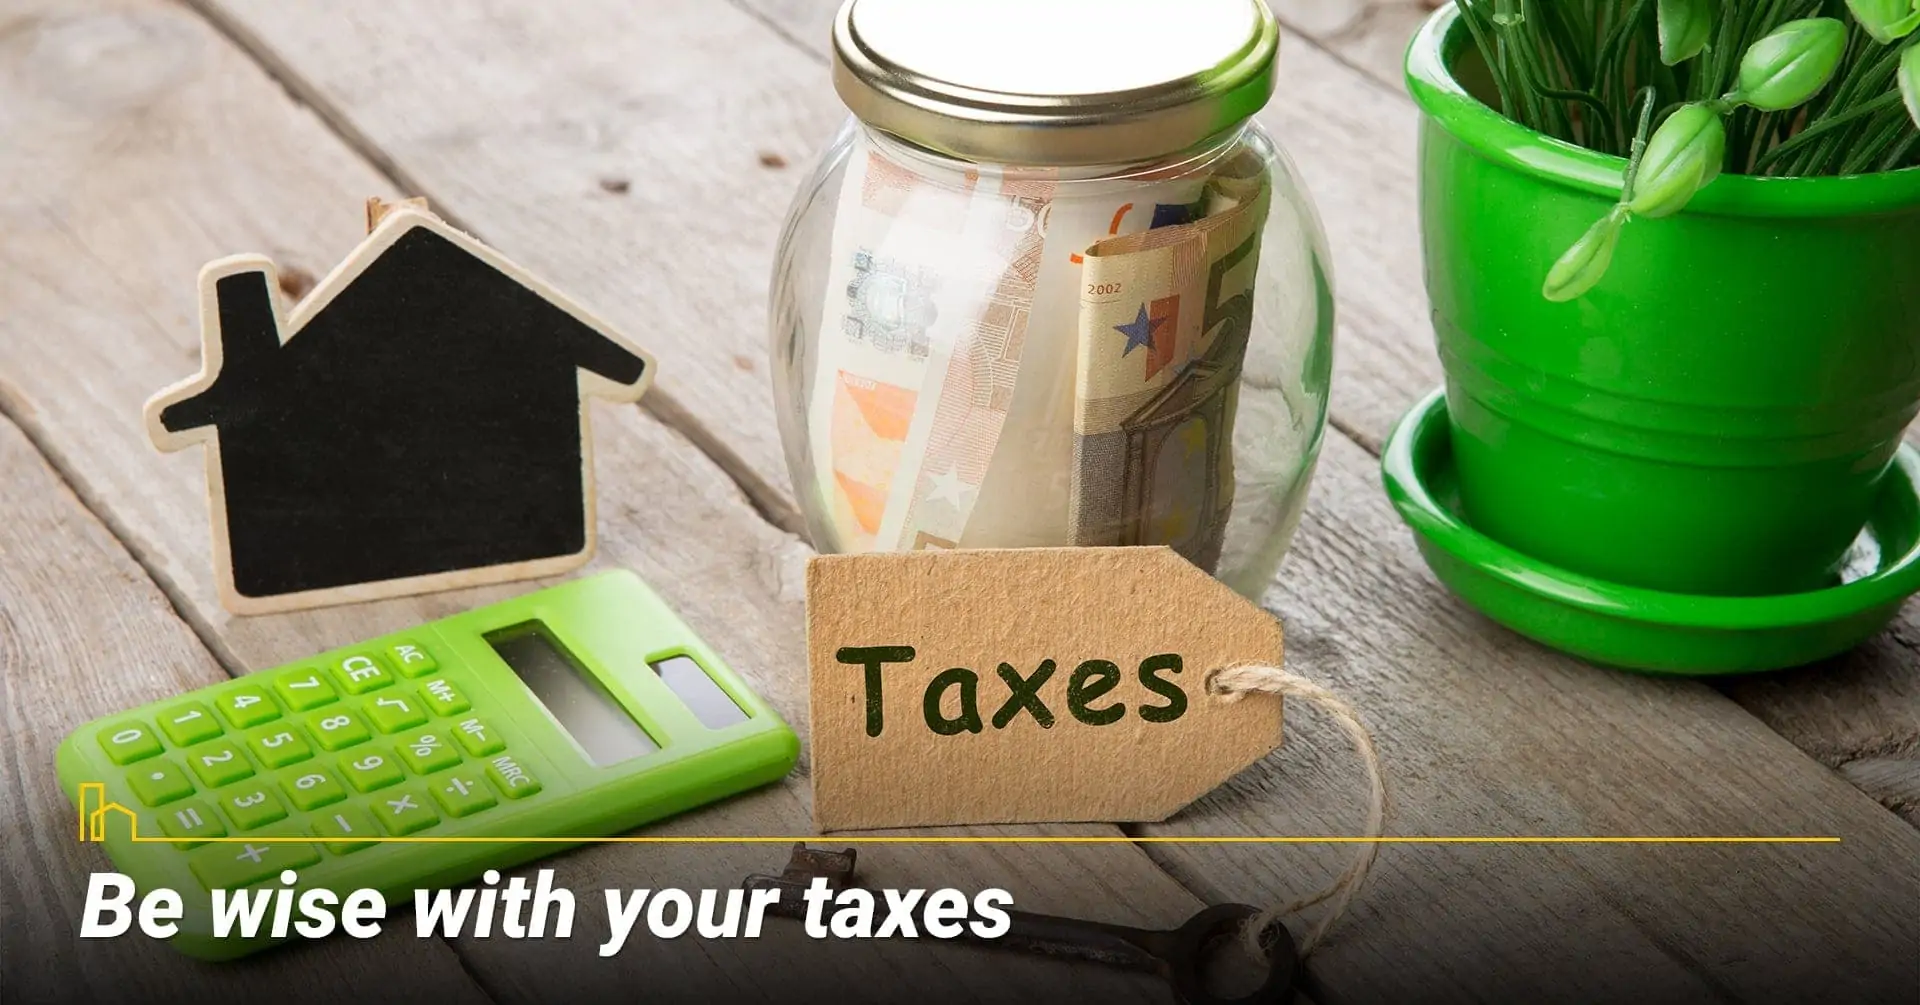 Be wise with your taxes, use tax advisor